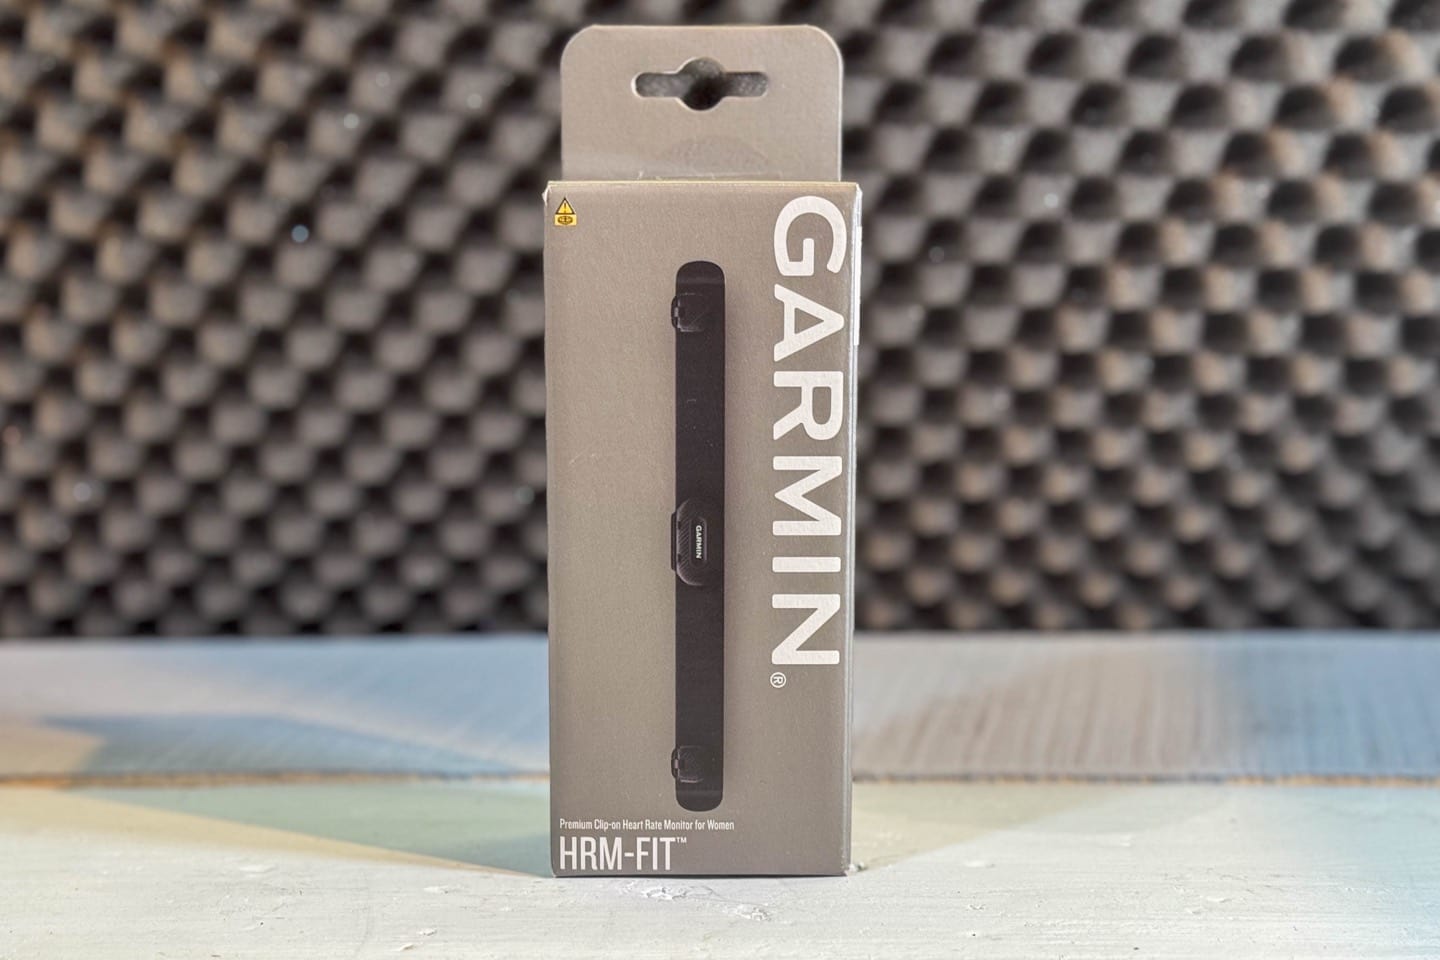 Garmin HRM-Pro review: a premium heart rate monitor for athletes